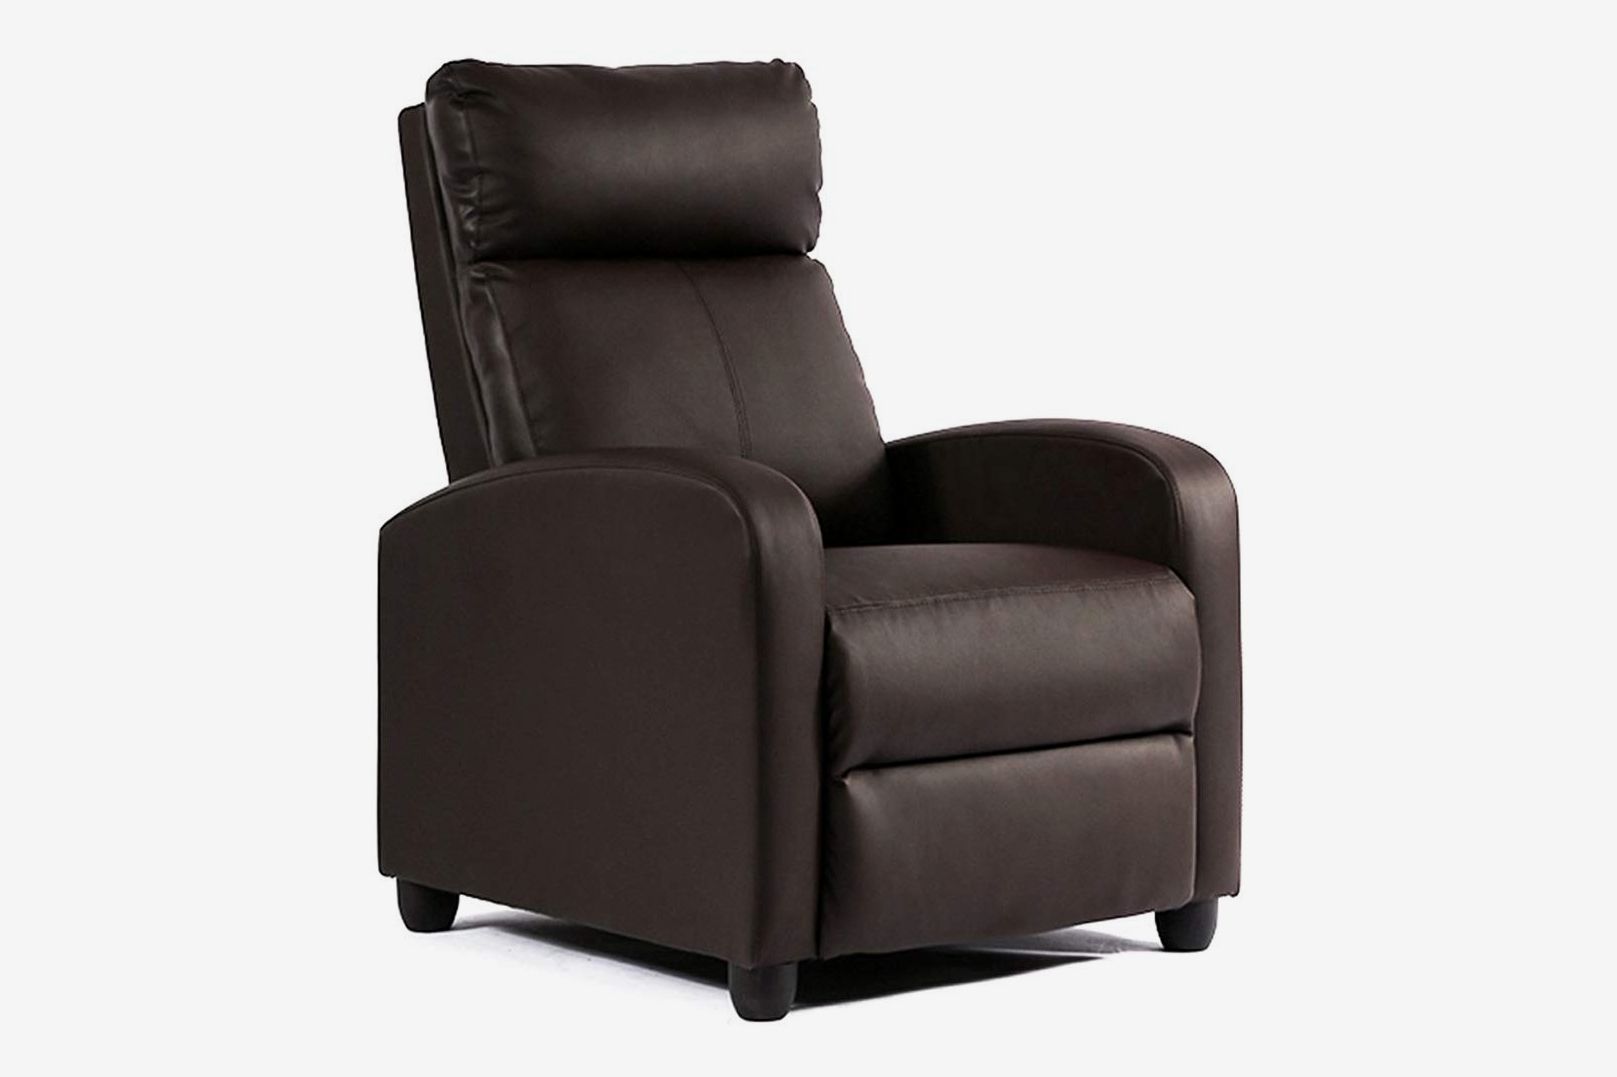 5 Best Leather Recliners 2019 The, Small Black Leather Recliner